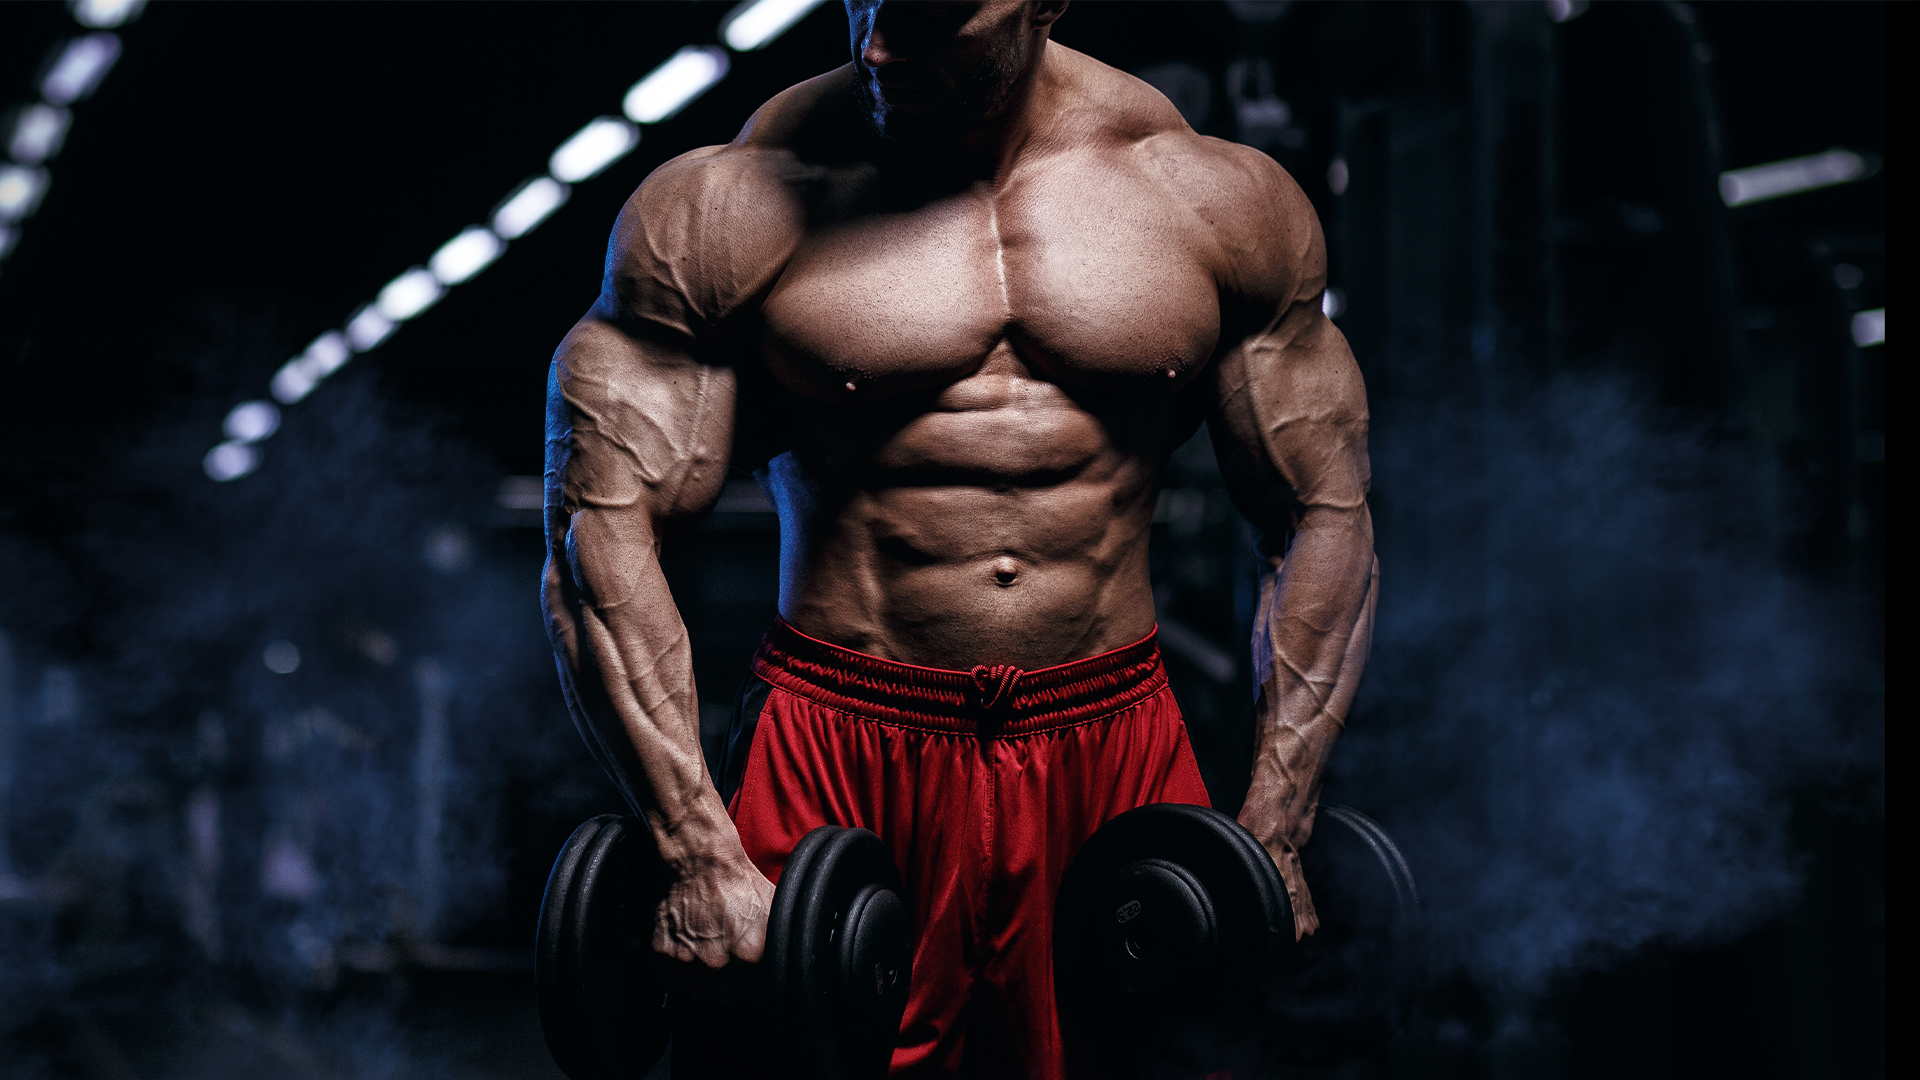 Beyond the 'dirty bulk': The best way to build muscle